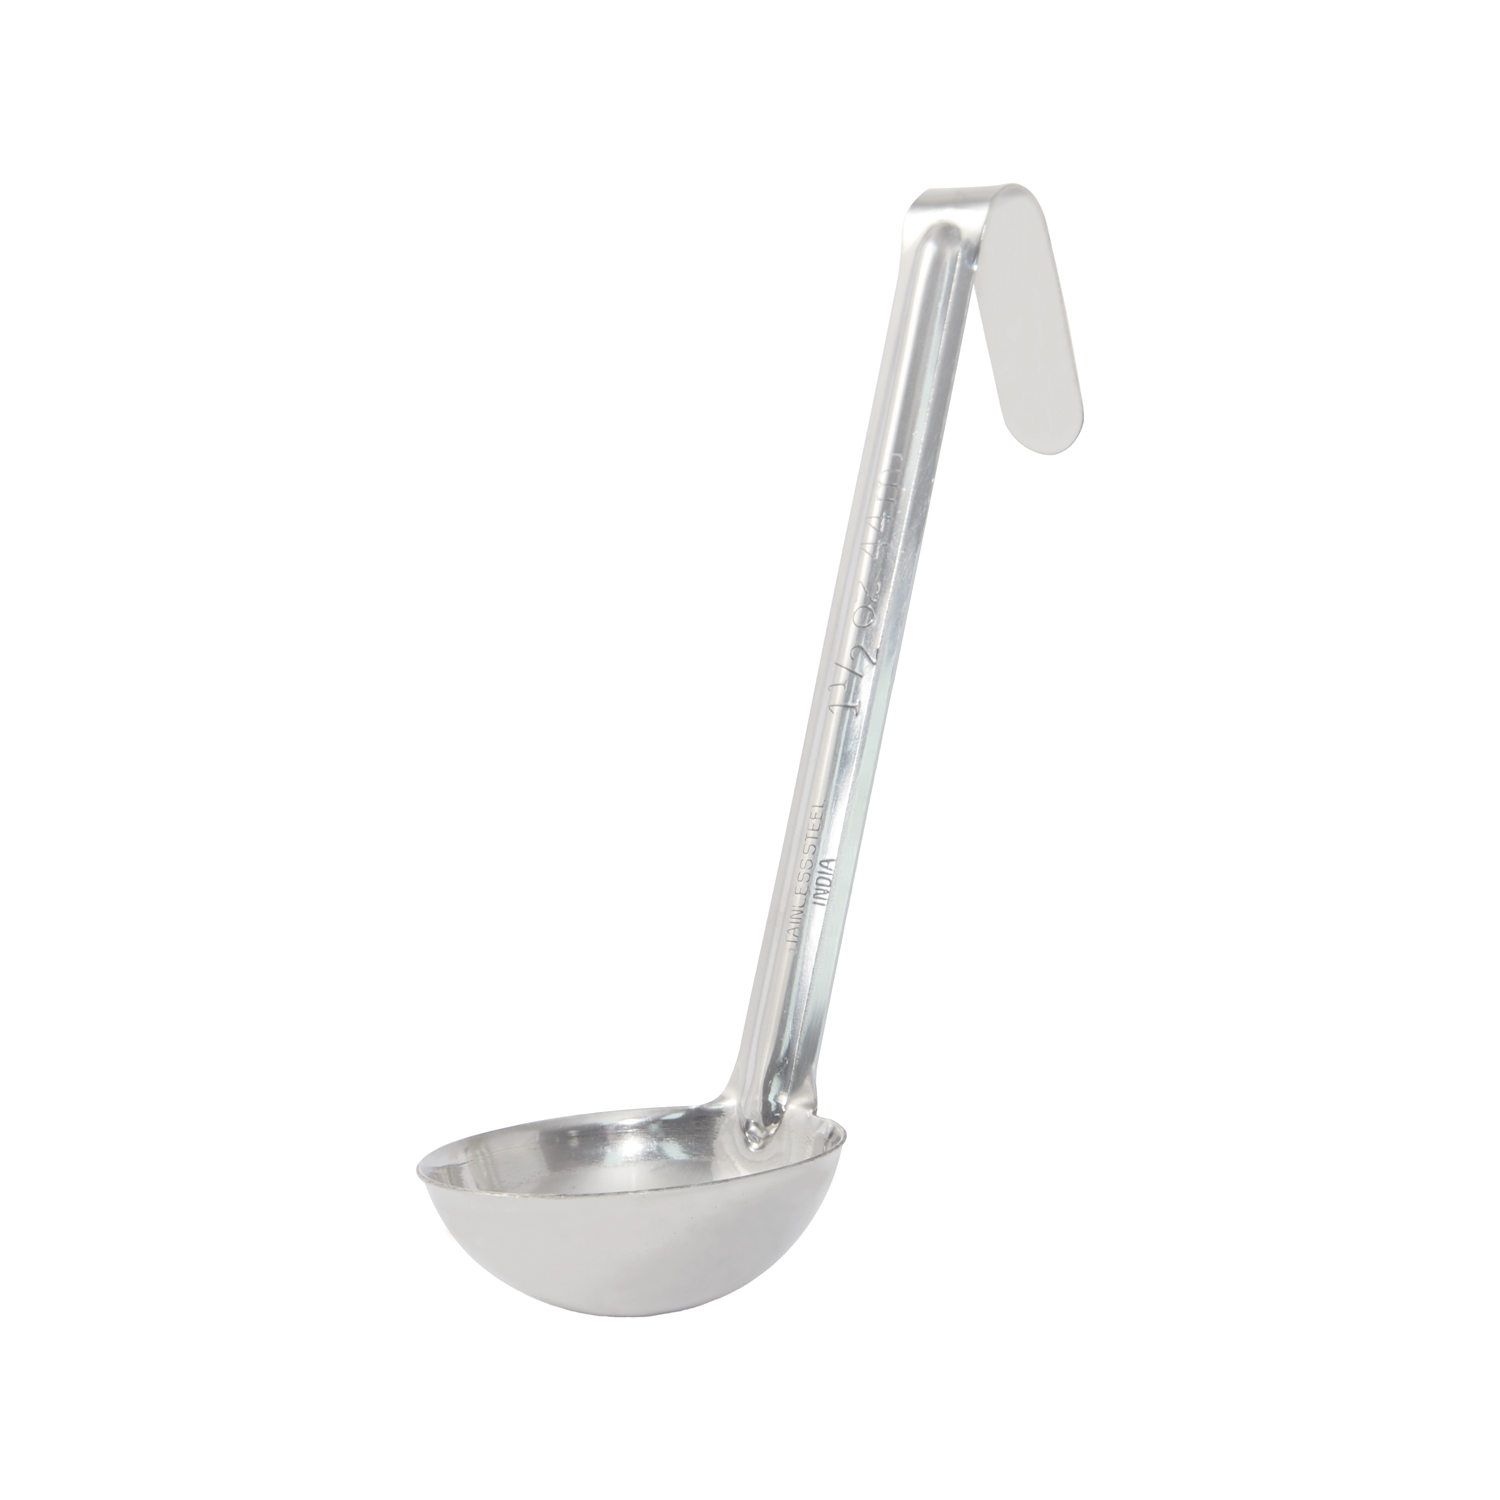 CAC China SLD6-15 One-Piece Stainless Steel Ladle with 6" Handle 1.5 oz.